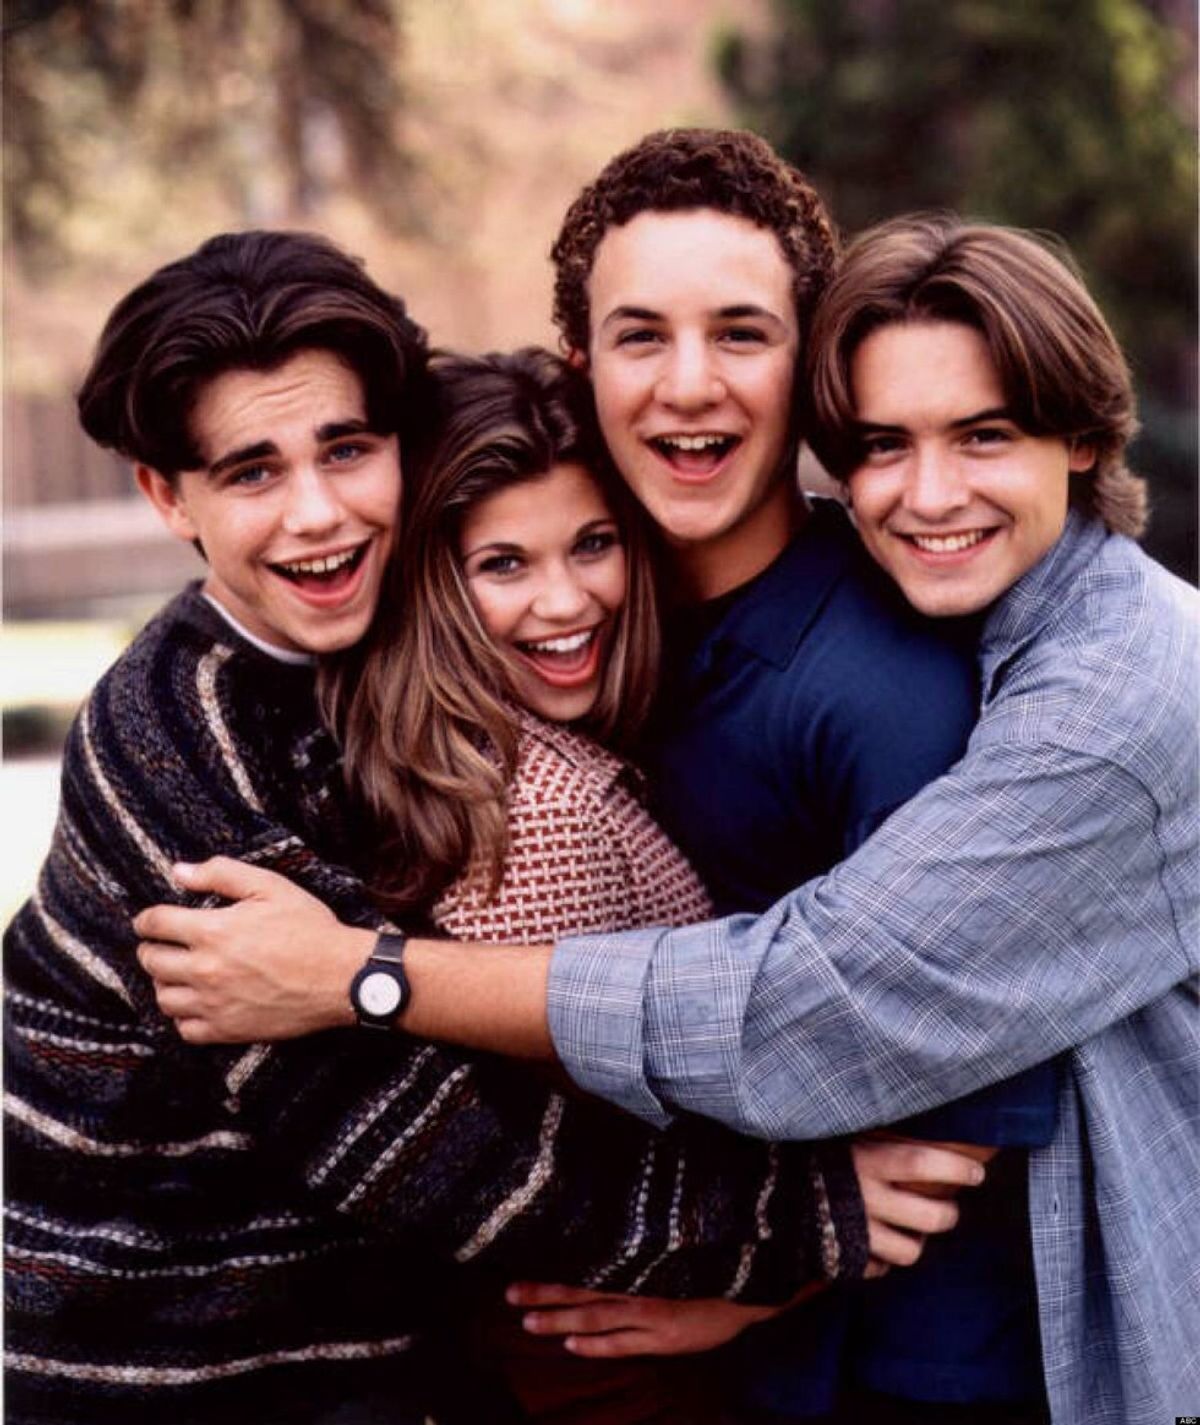 5 Life Lessons From 'Boy Meets World'